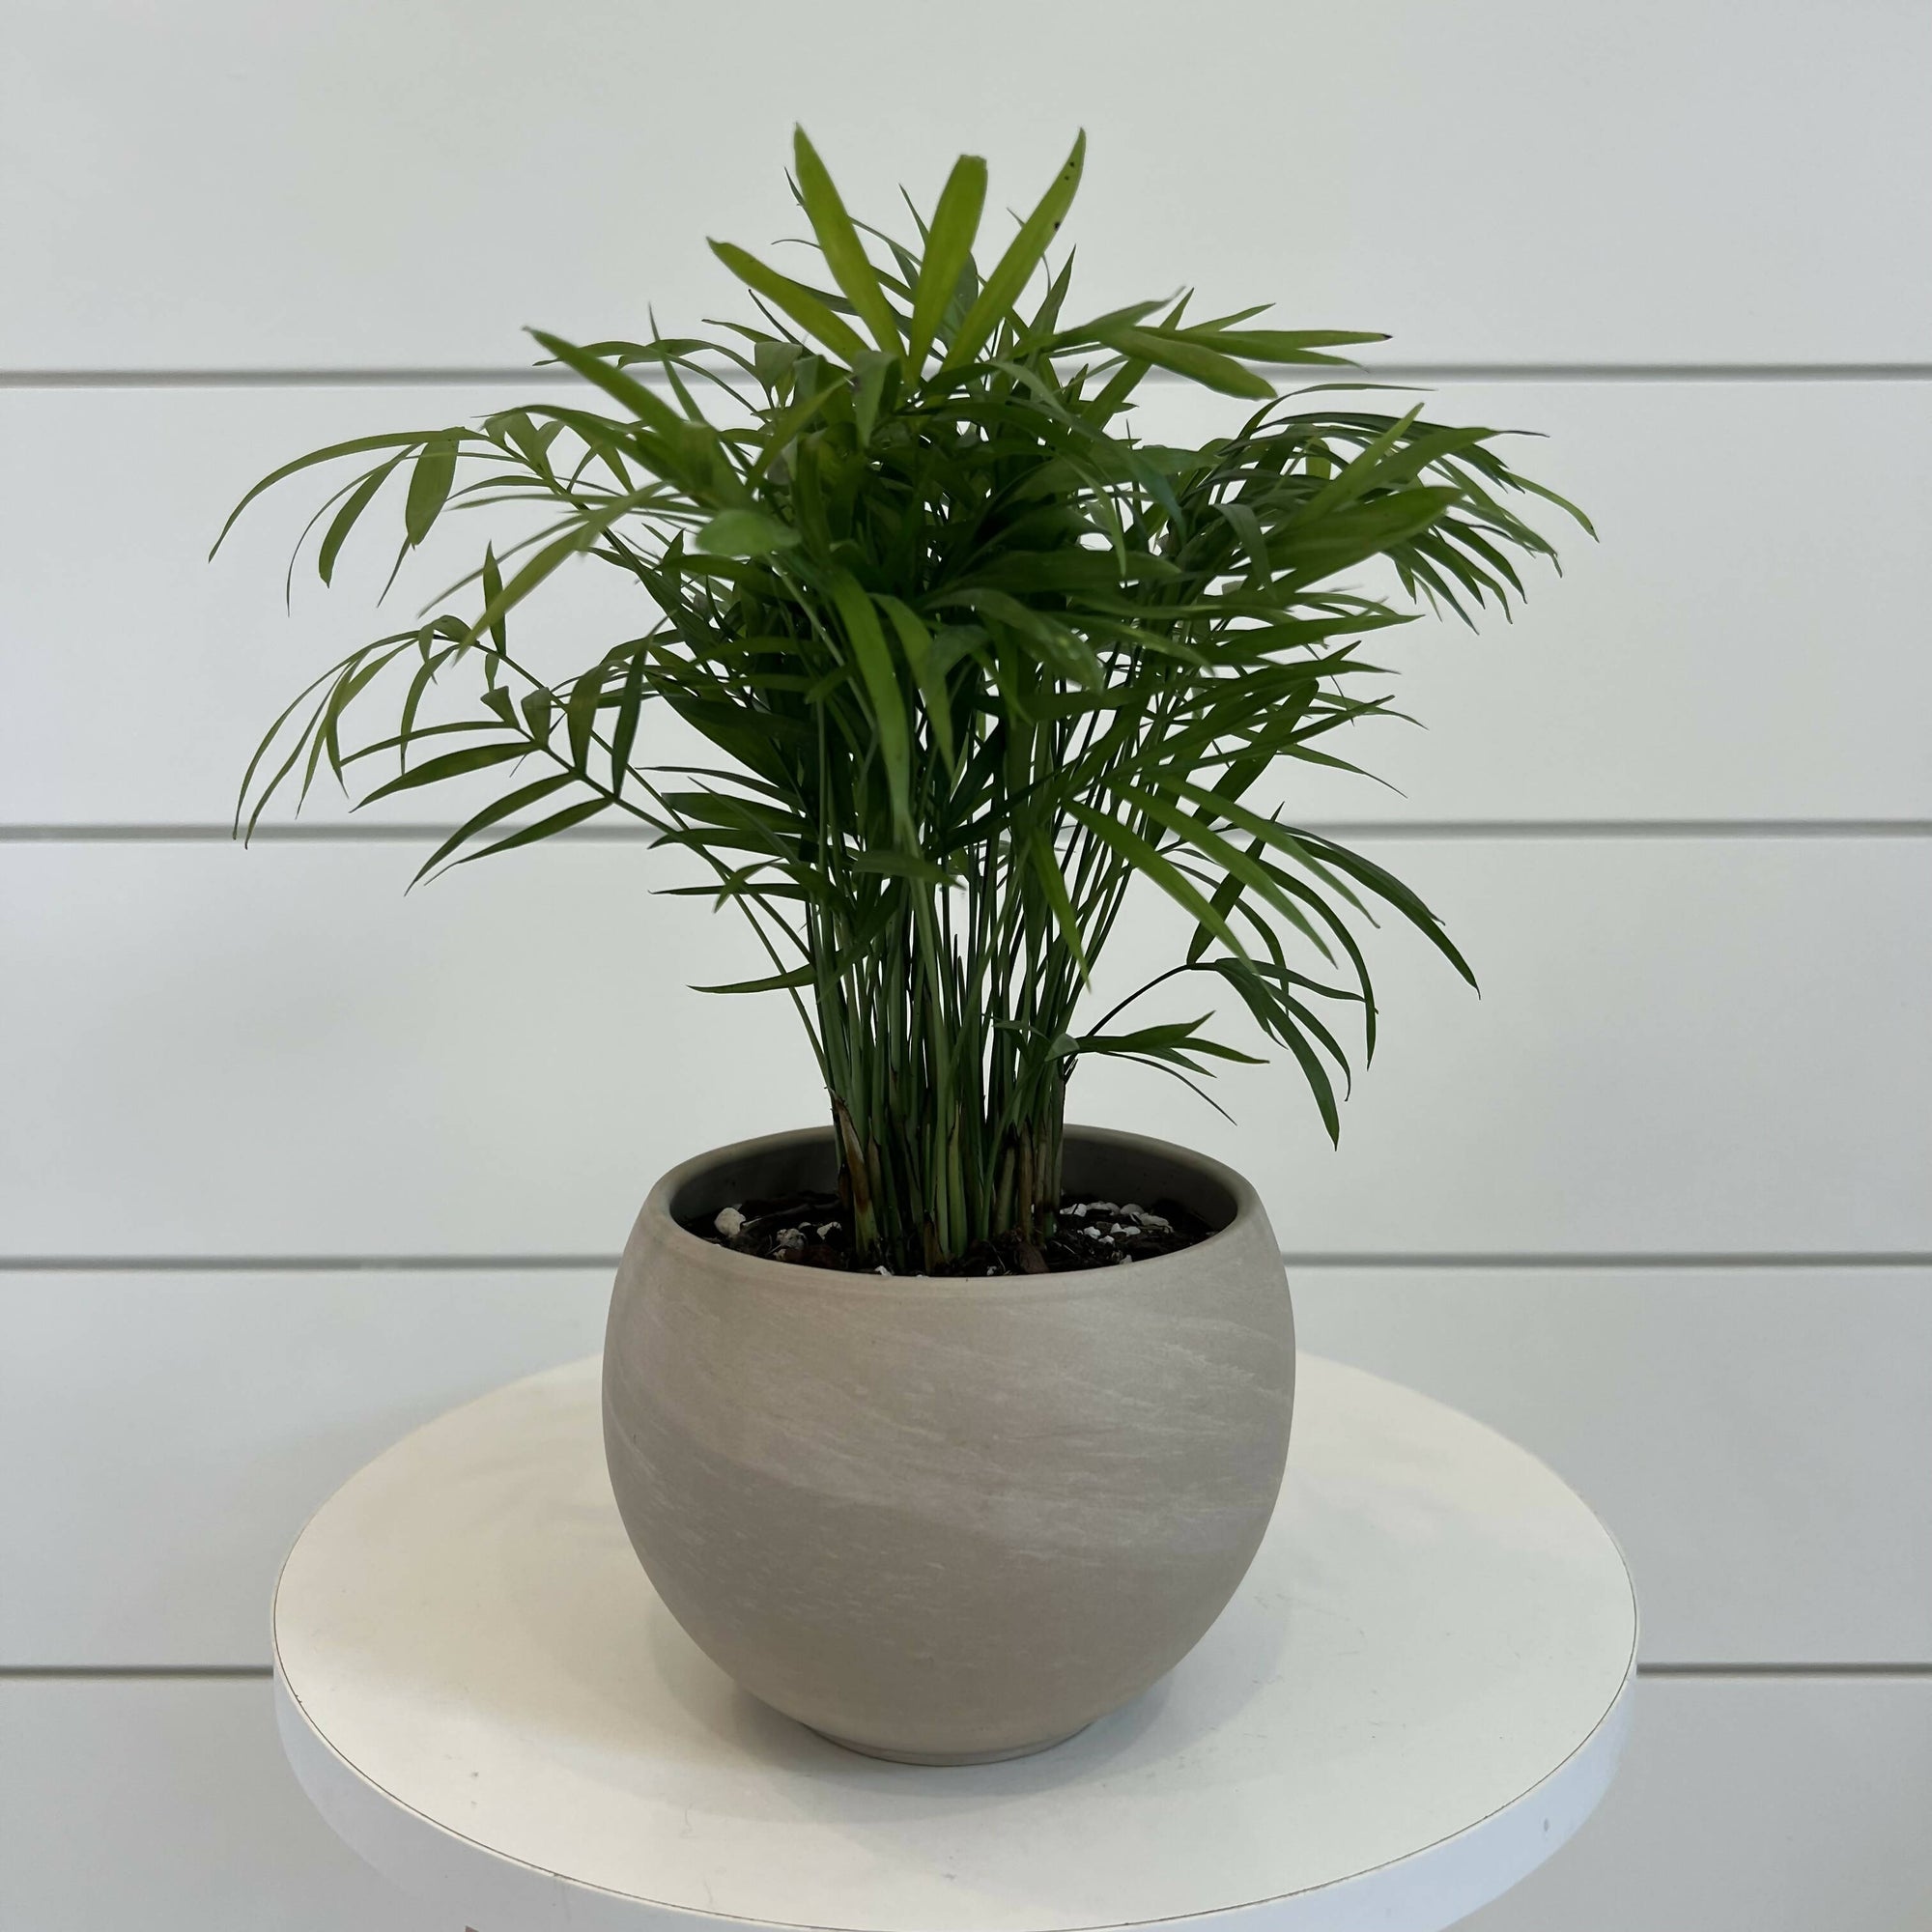 Planted on Wells | Parlor Palm